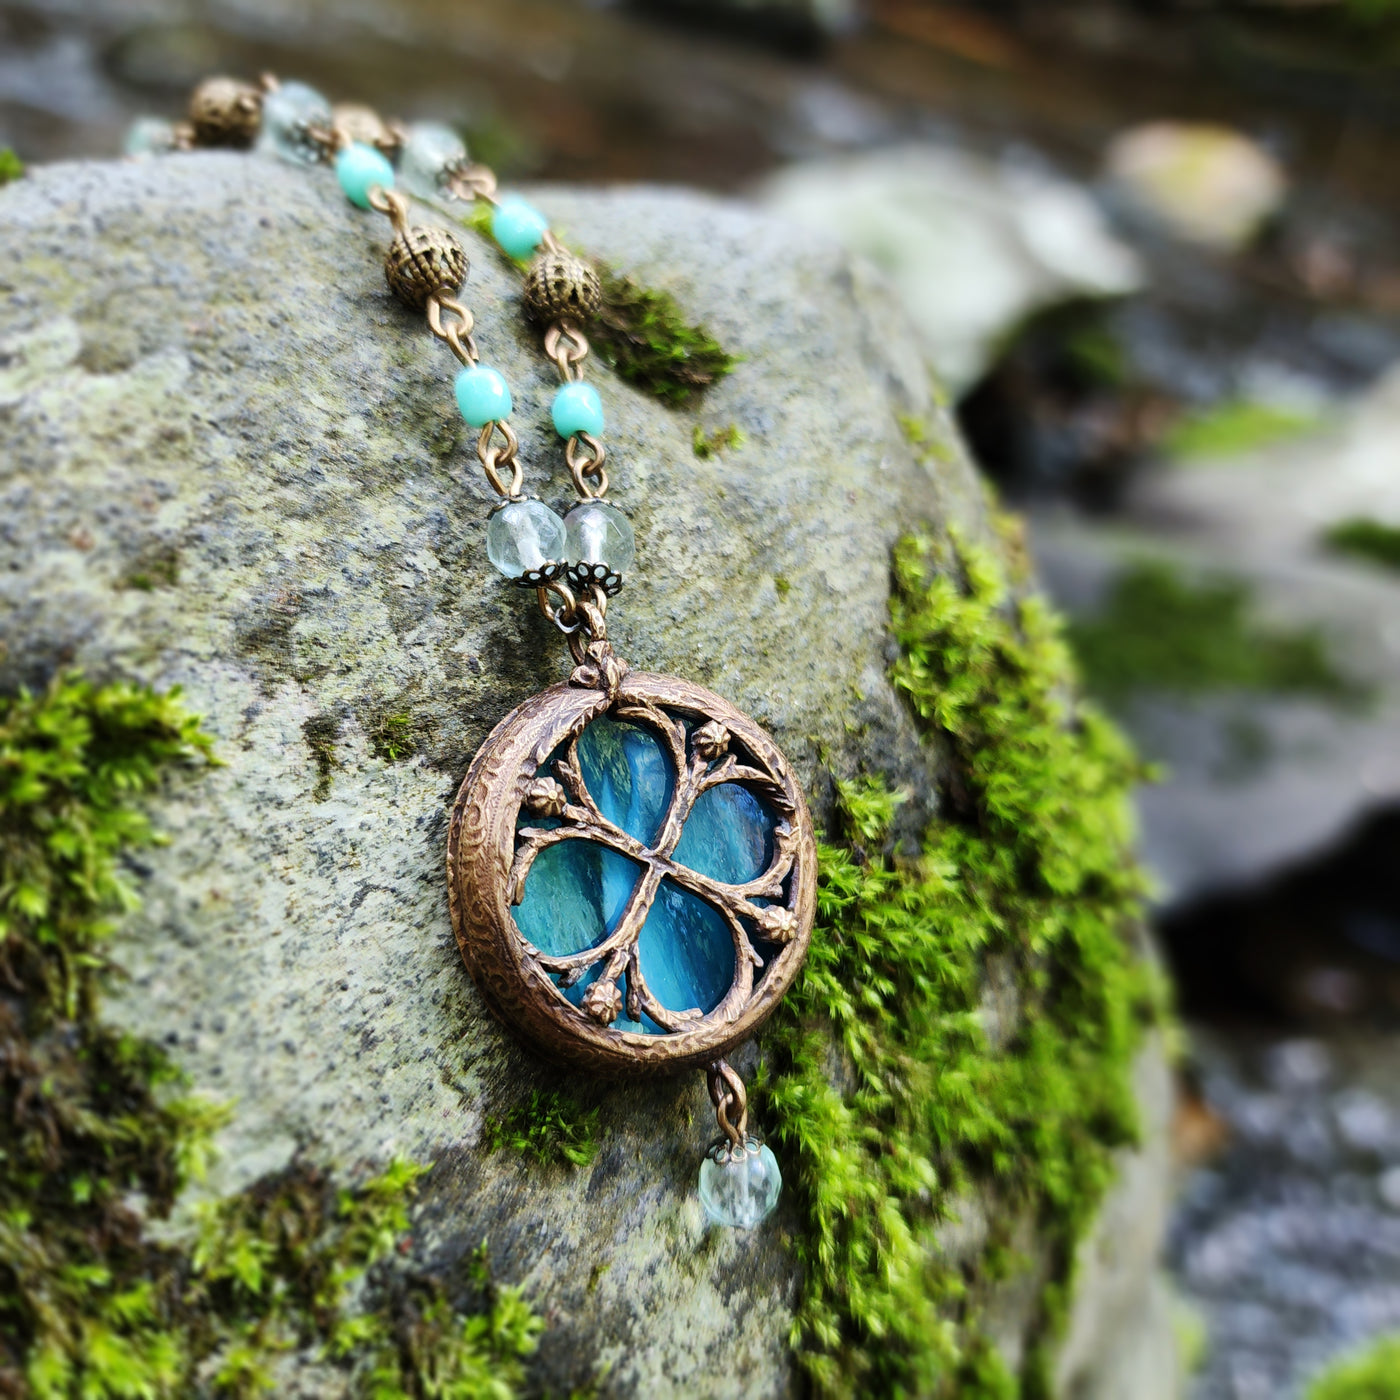 theia - floriated clover miracle window amulet